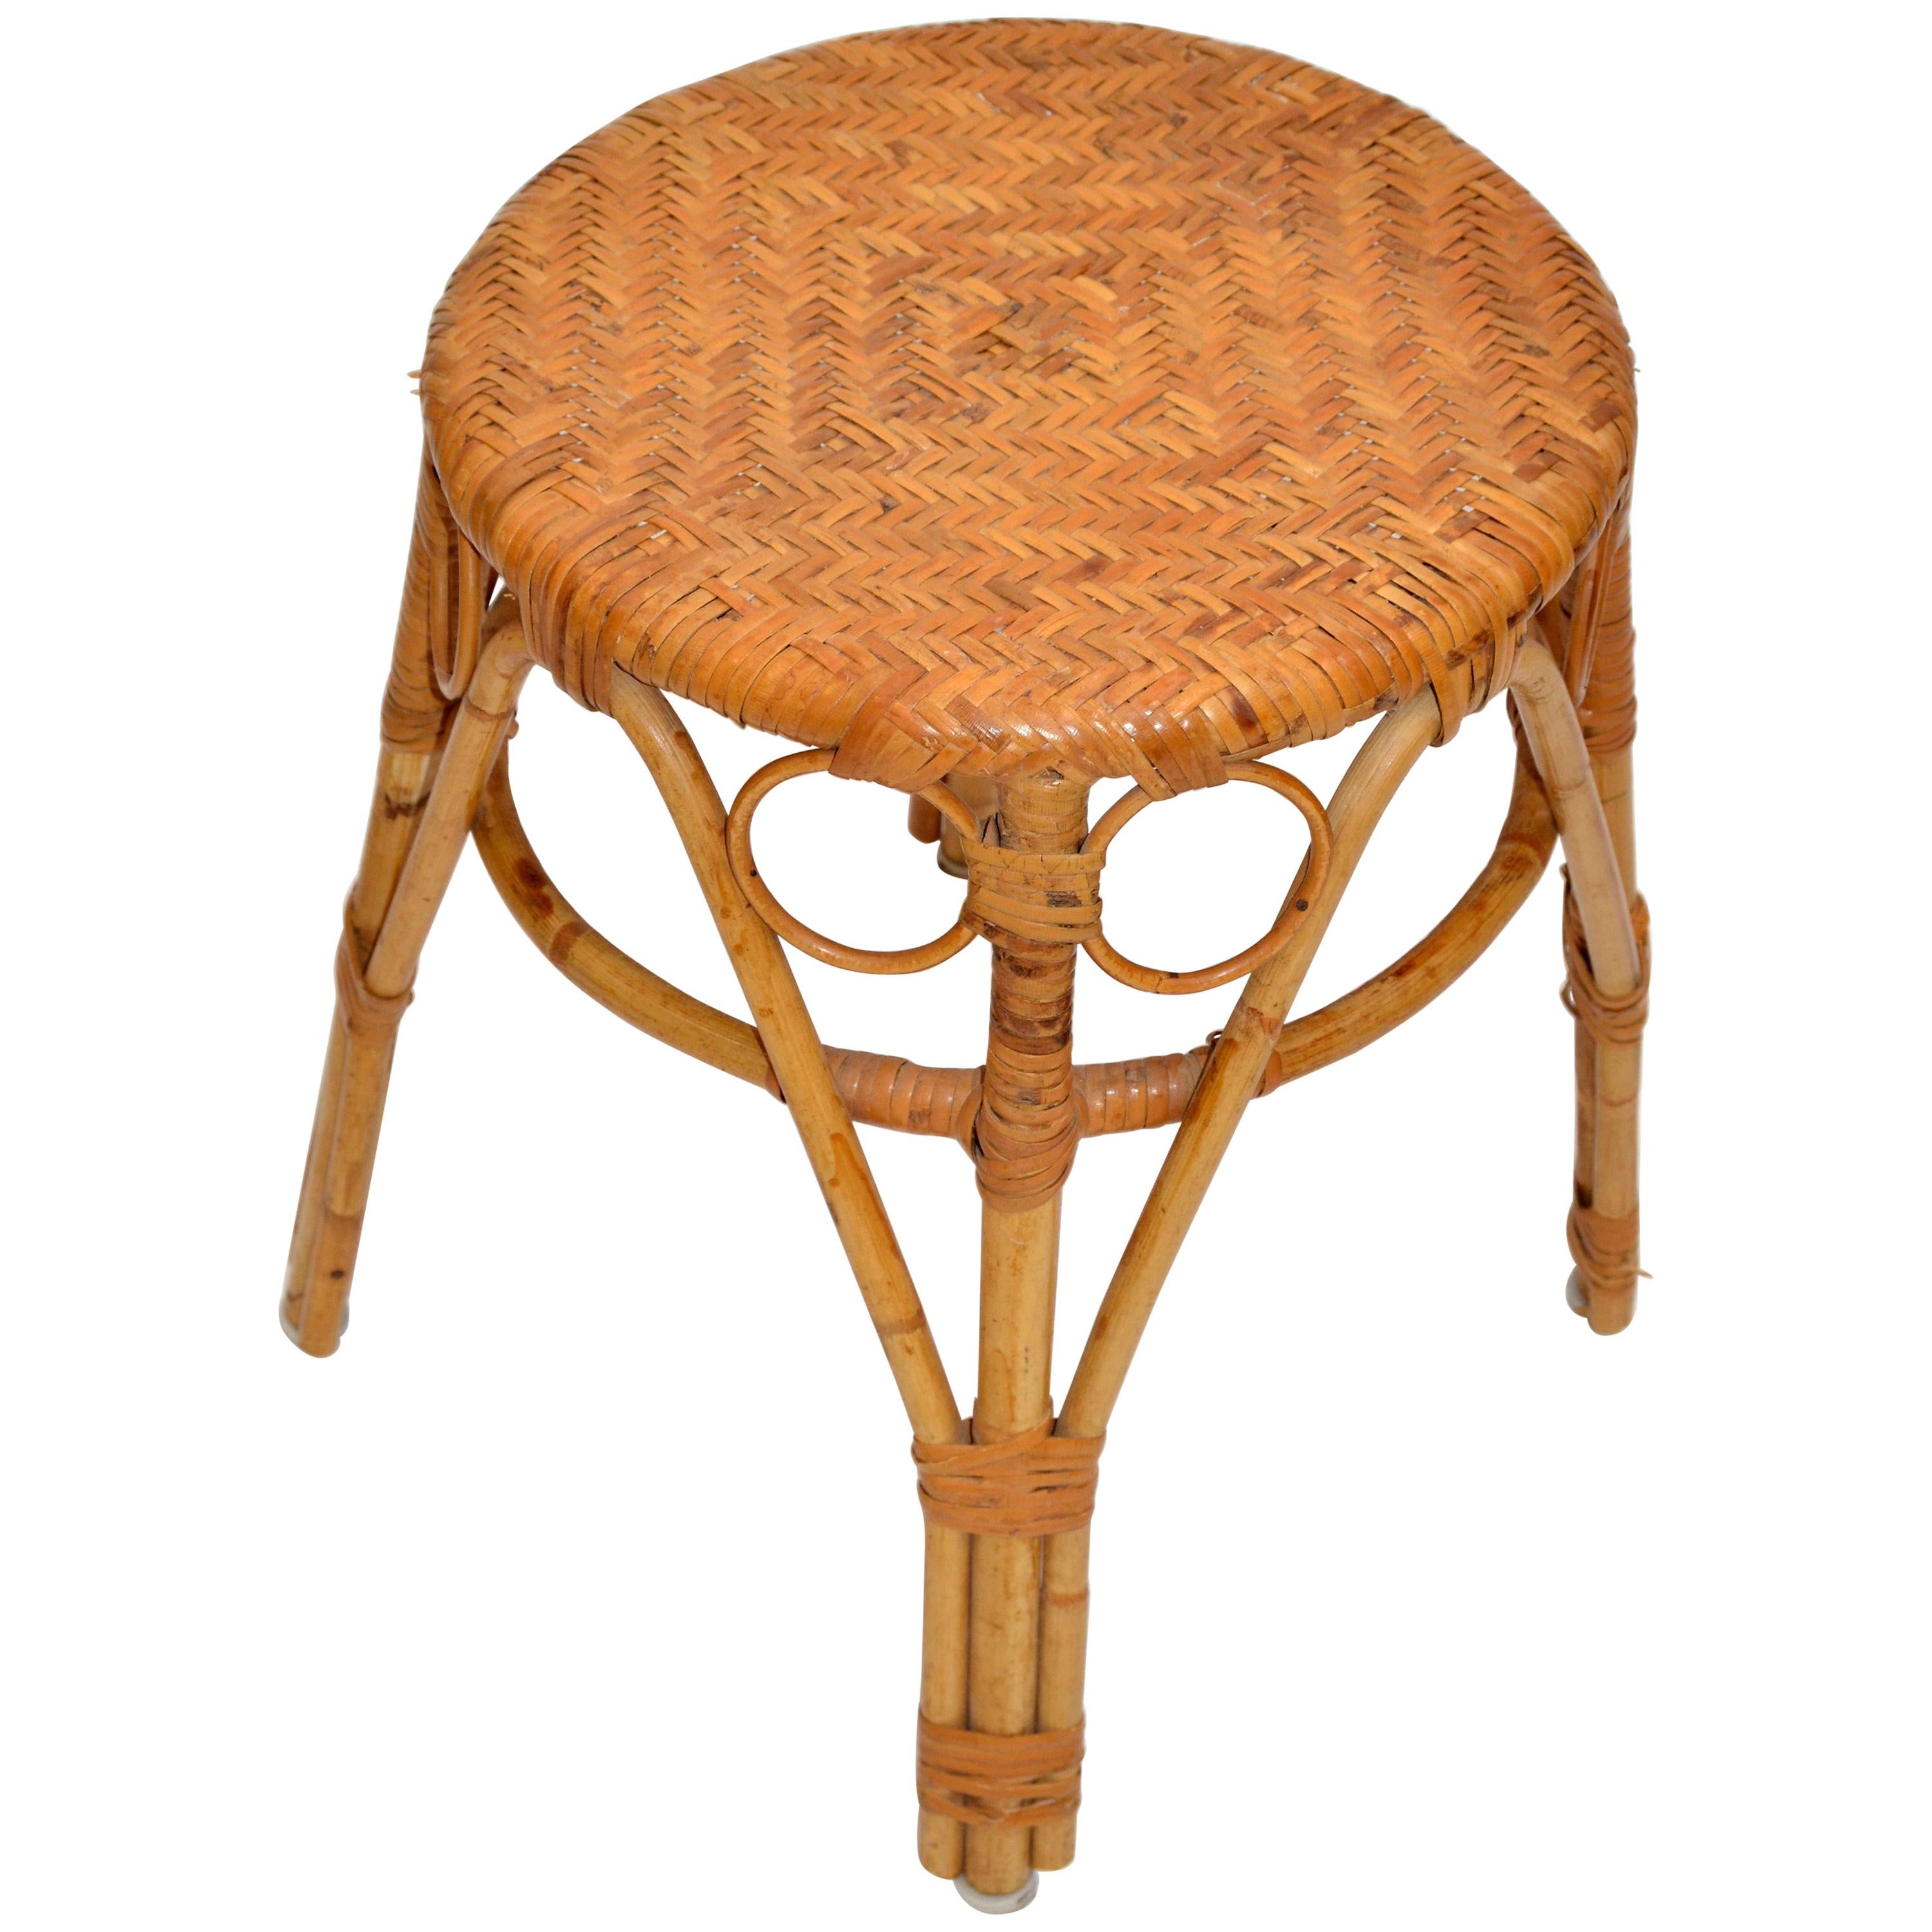 Vintage Bohemian Chic Woven Blonde Bamboo and Rattan Stool